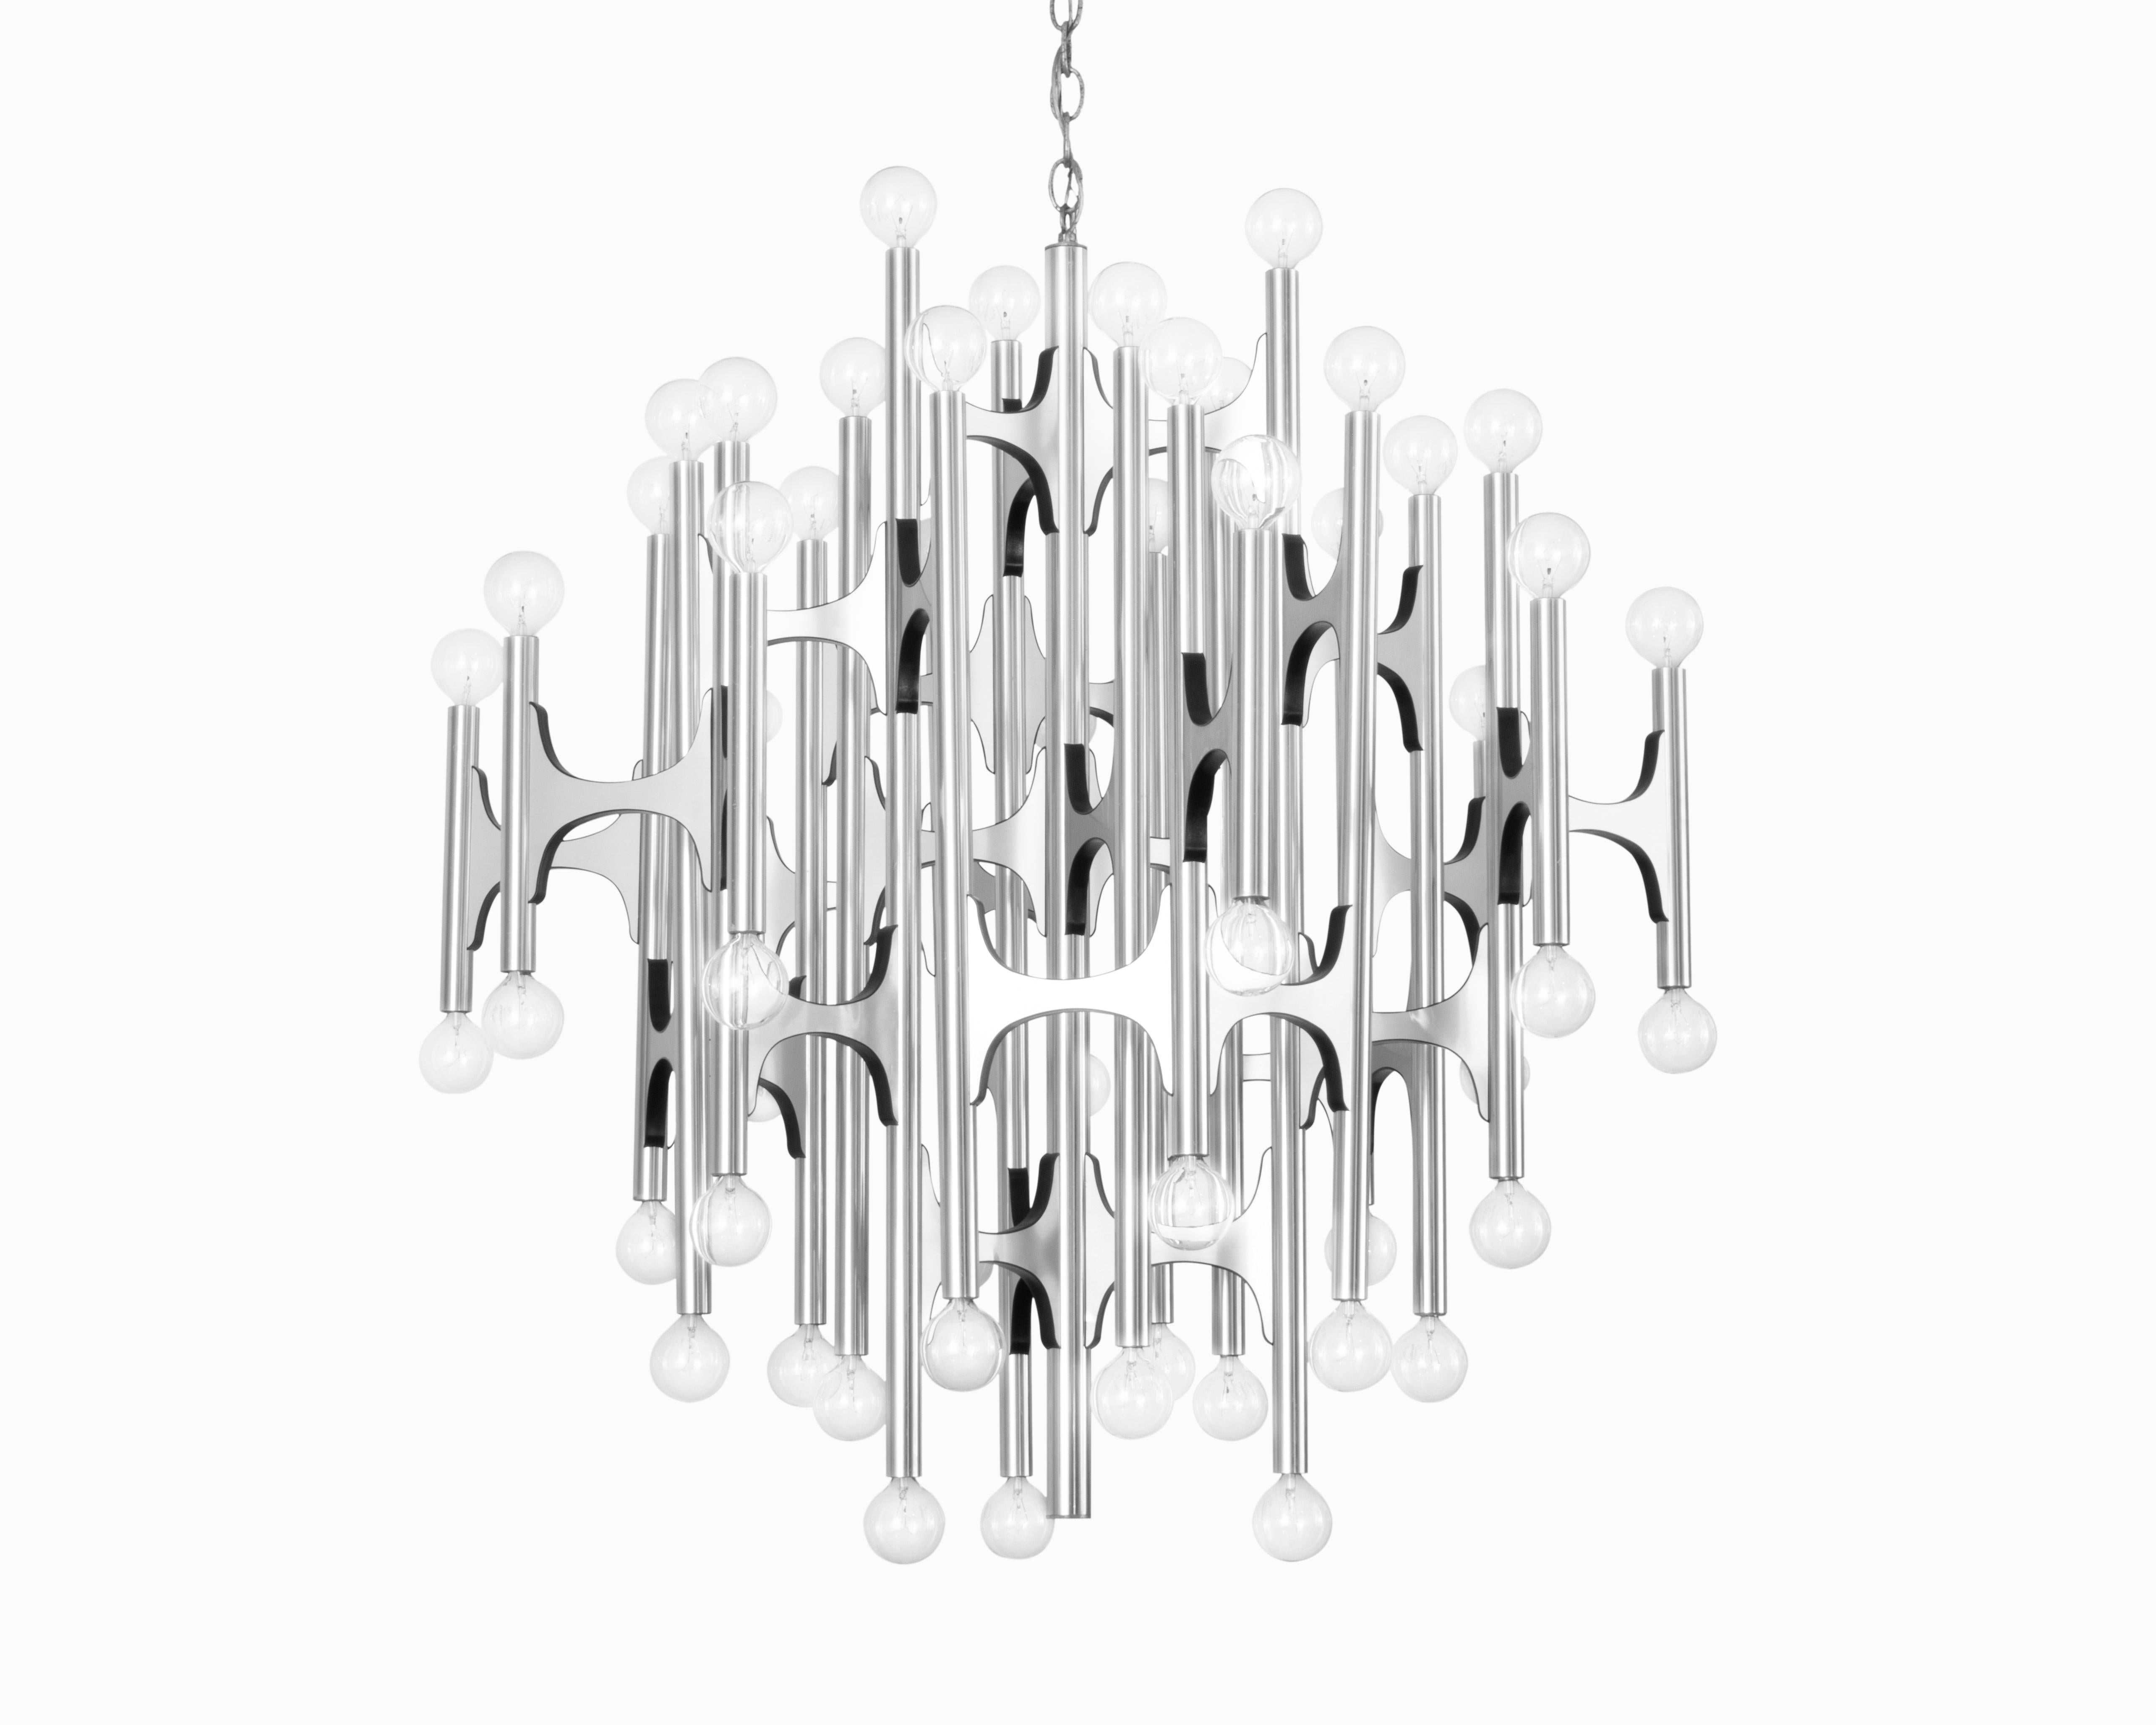 Here is a monumental and captivating chandelier designed by Gaetano Sciolari for Lightolier. The sculptural combination of brushed aluminum and black plastic elements are easy to get lost in, creating a mesmerizing lighting experience. It is in very